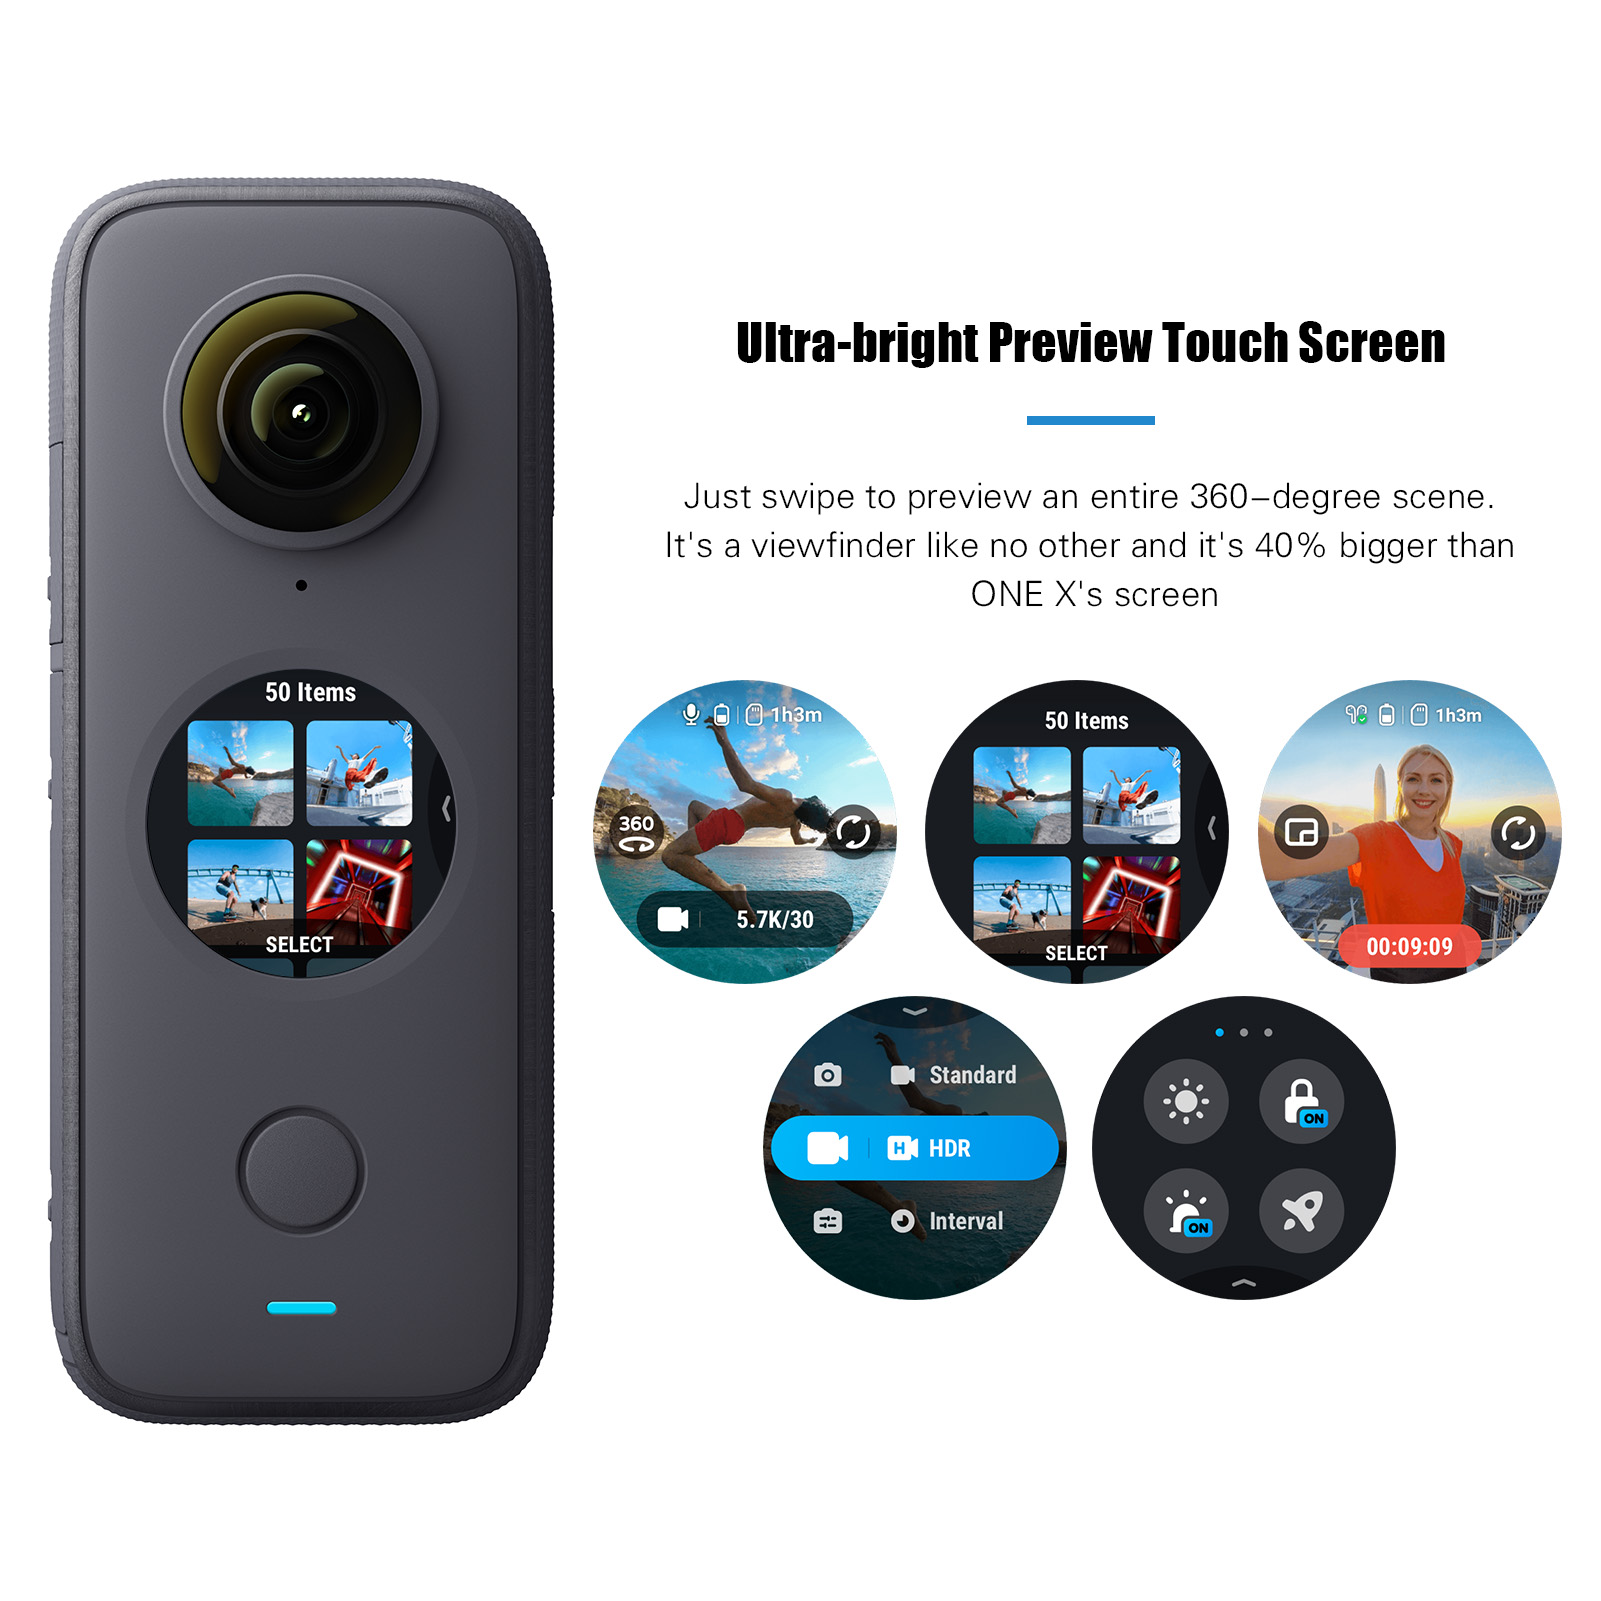 Insta360 ONE Sports 360 Streaming, Waterproof WiFi Time Touch Voice Action Construction 30fps Video X2 Camera,5.7K Degree Screen,Live Webcam, Transfer Control,Real Documentation Stabilization